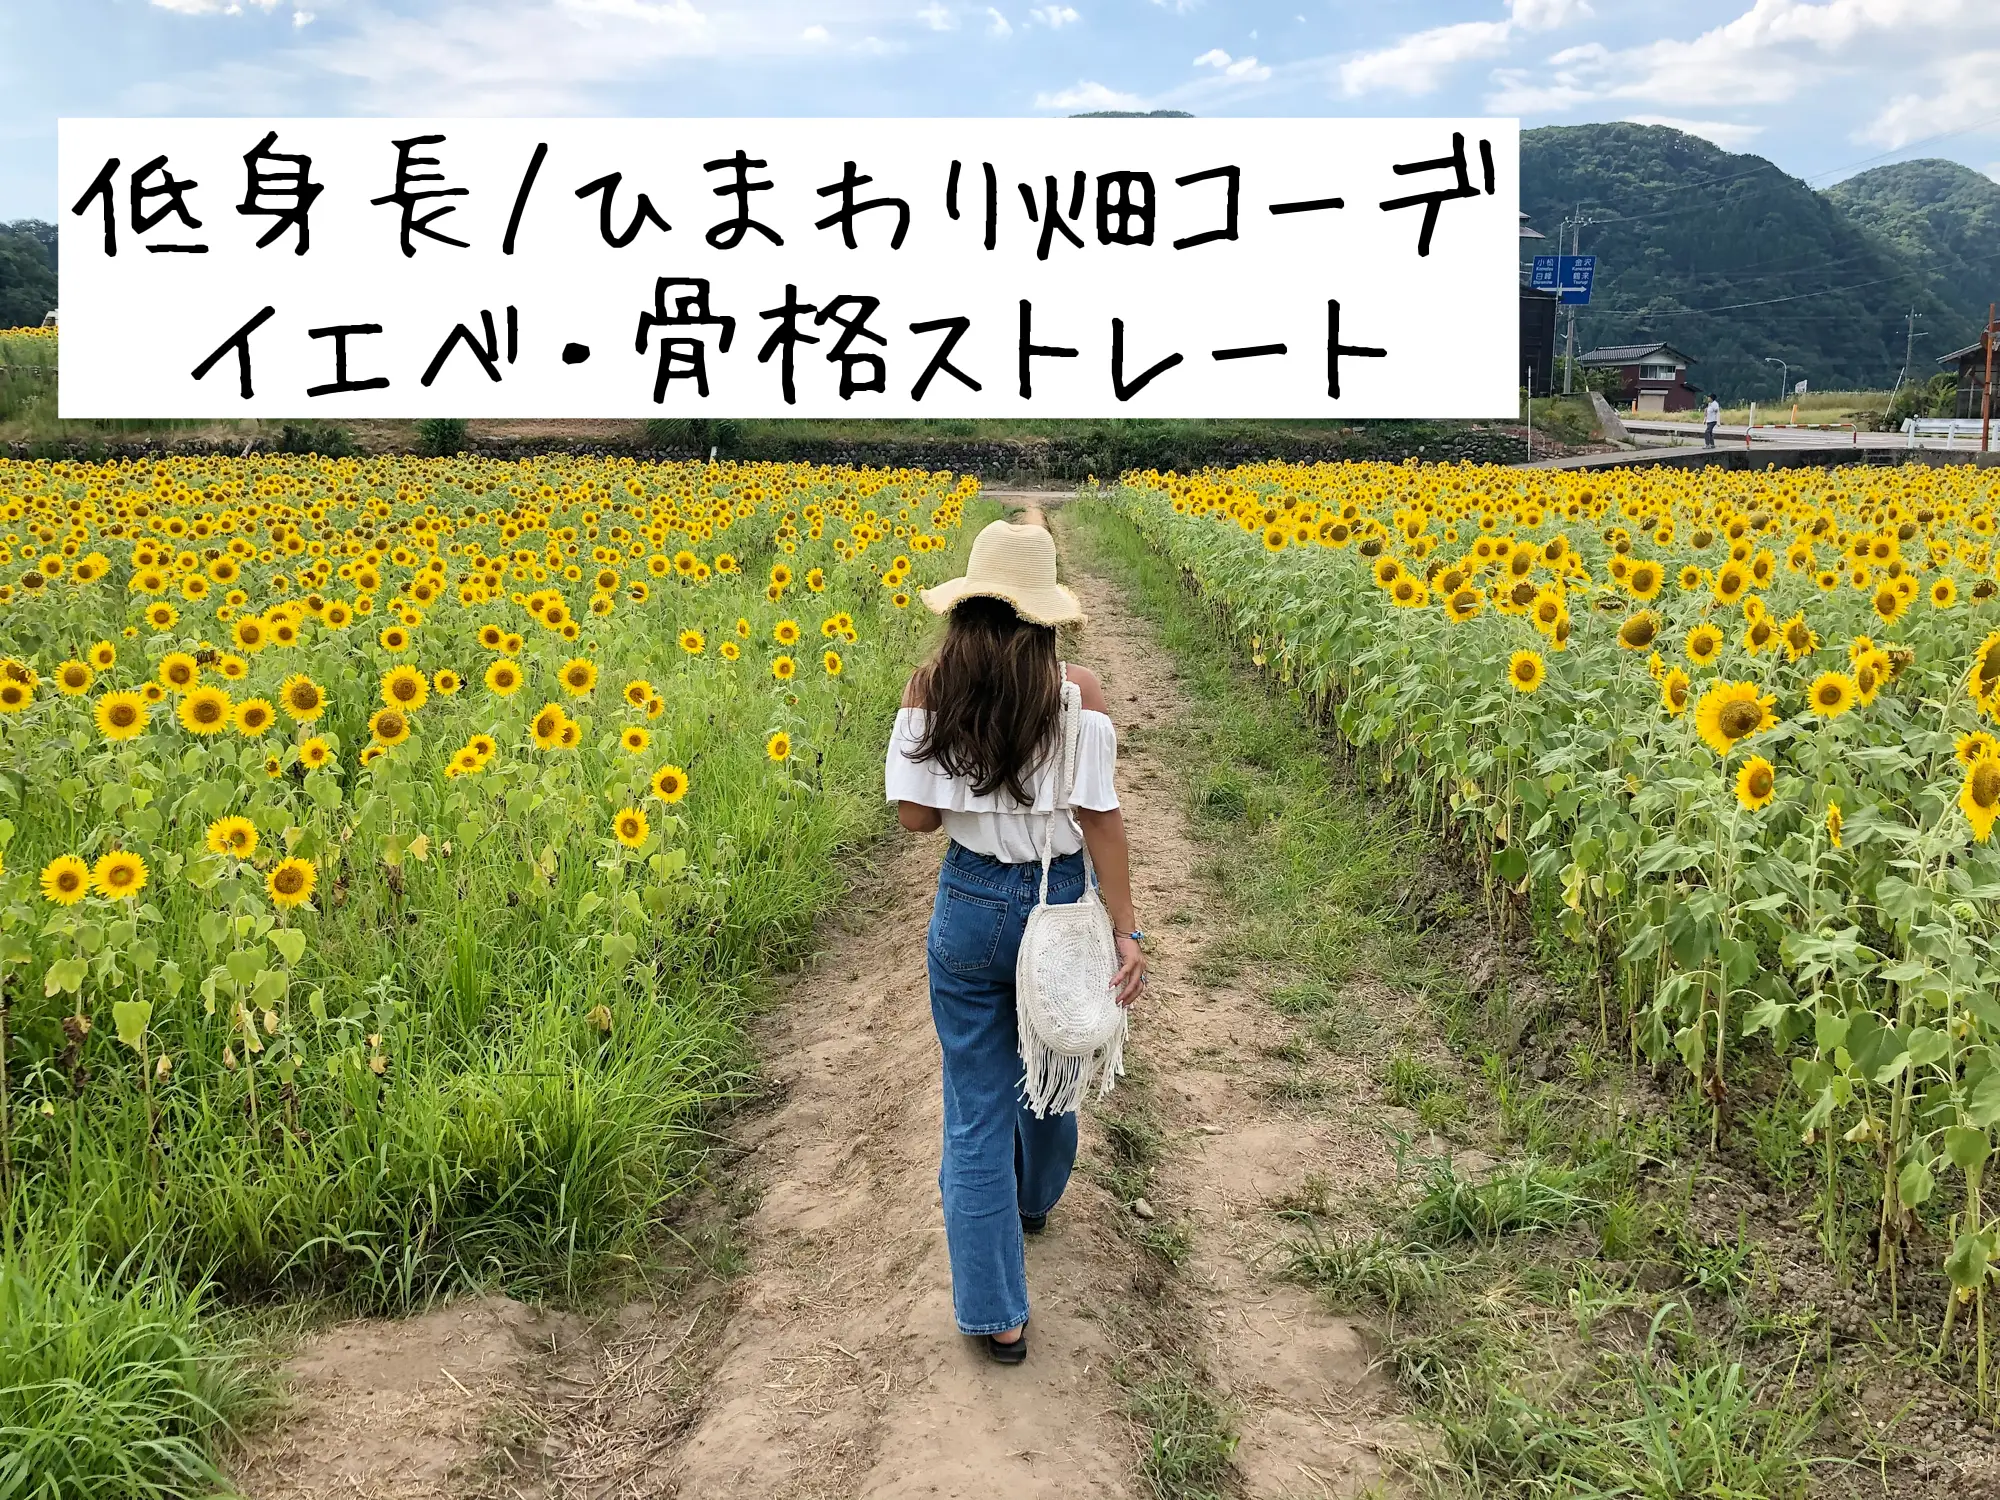 White × Denim 】 Sunflower Field Corde | Gallery posted by